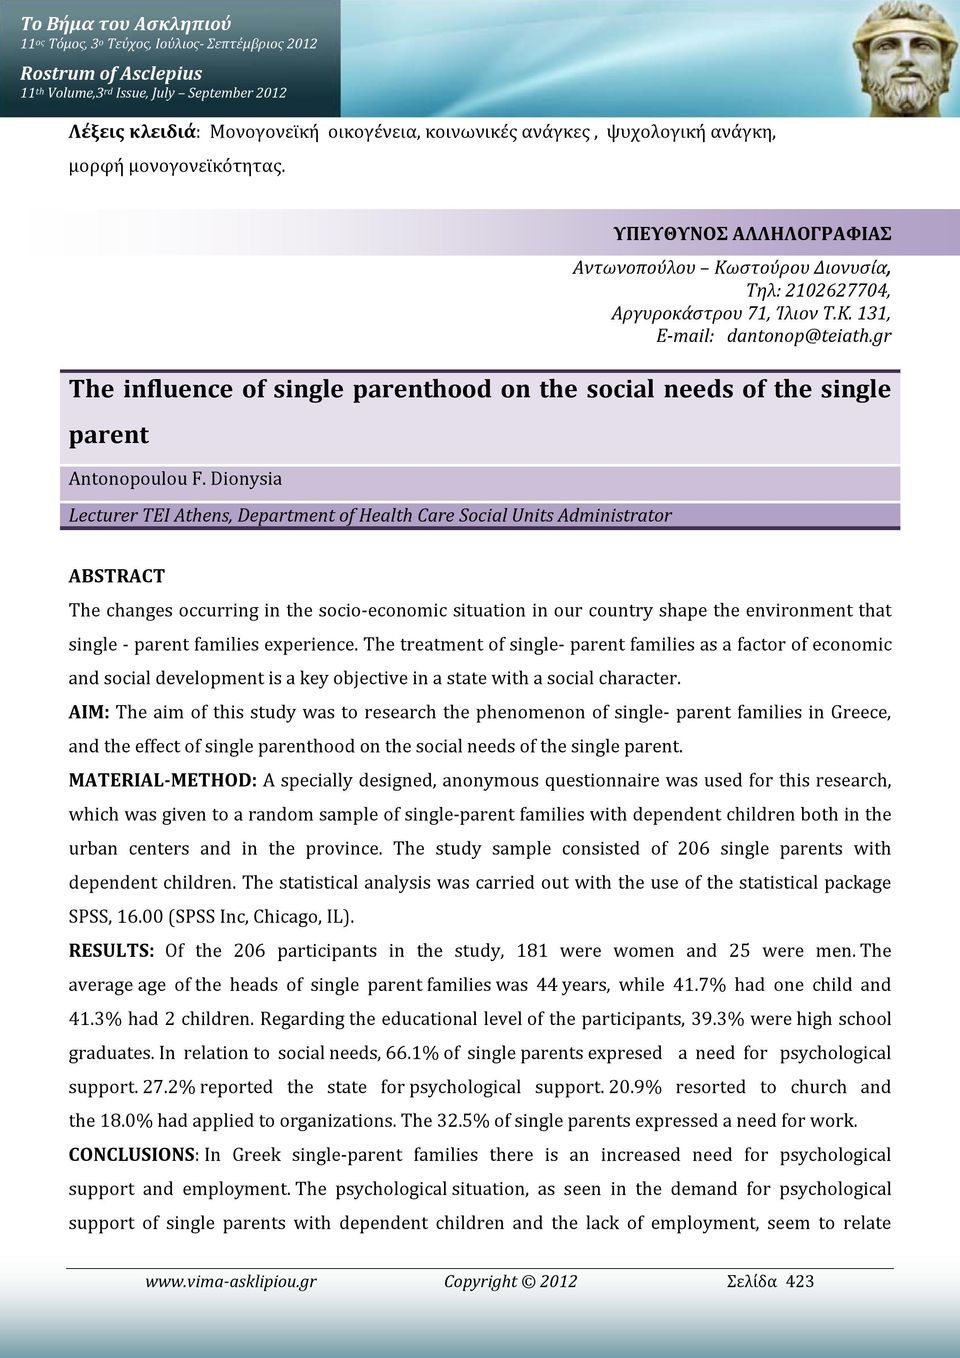 gr The influence of single parenthood on the social needs of the single parent Antonopoulou F.